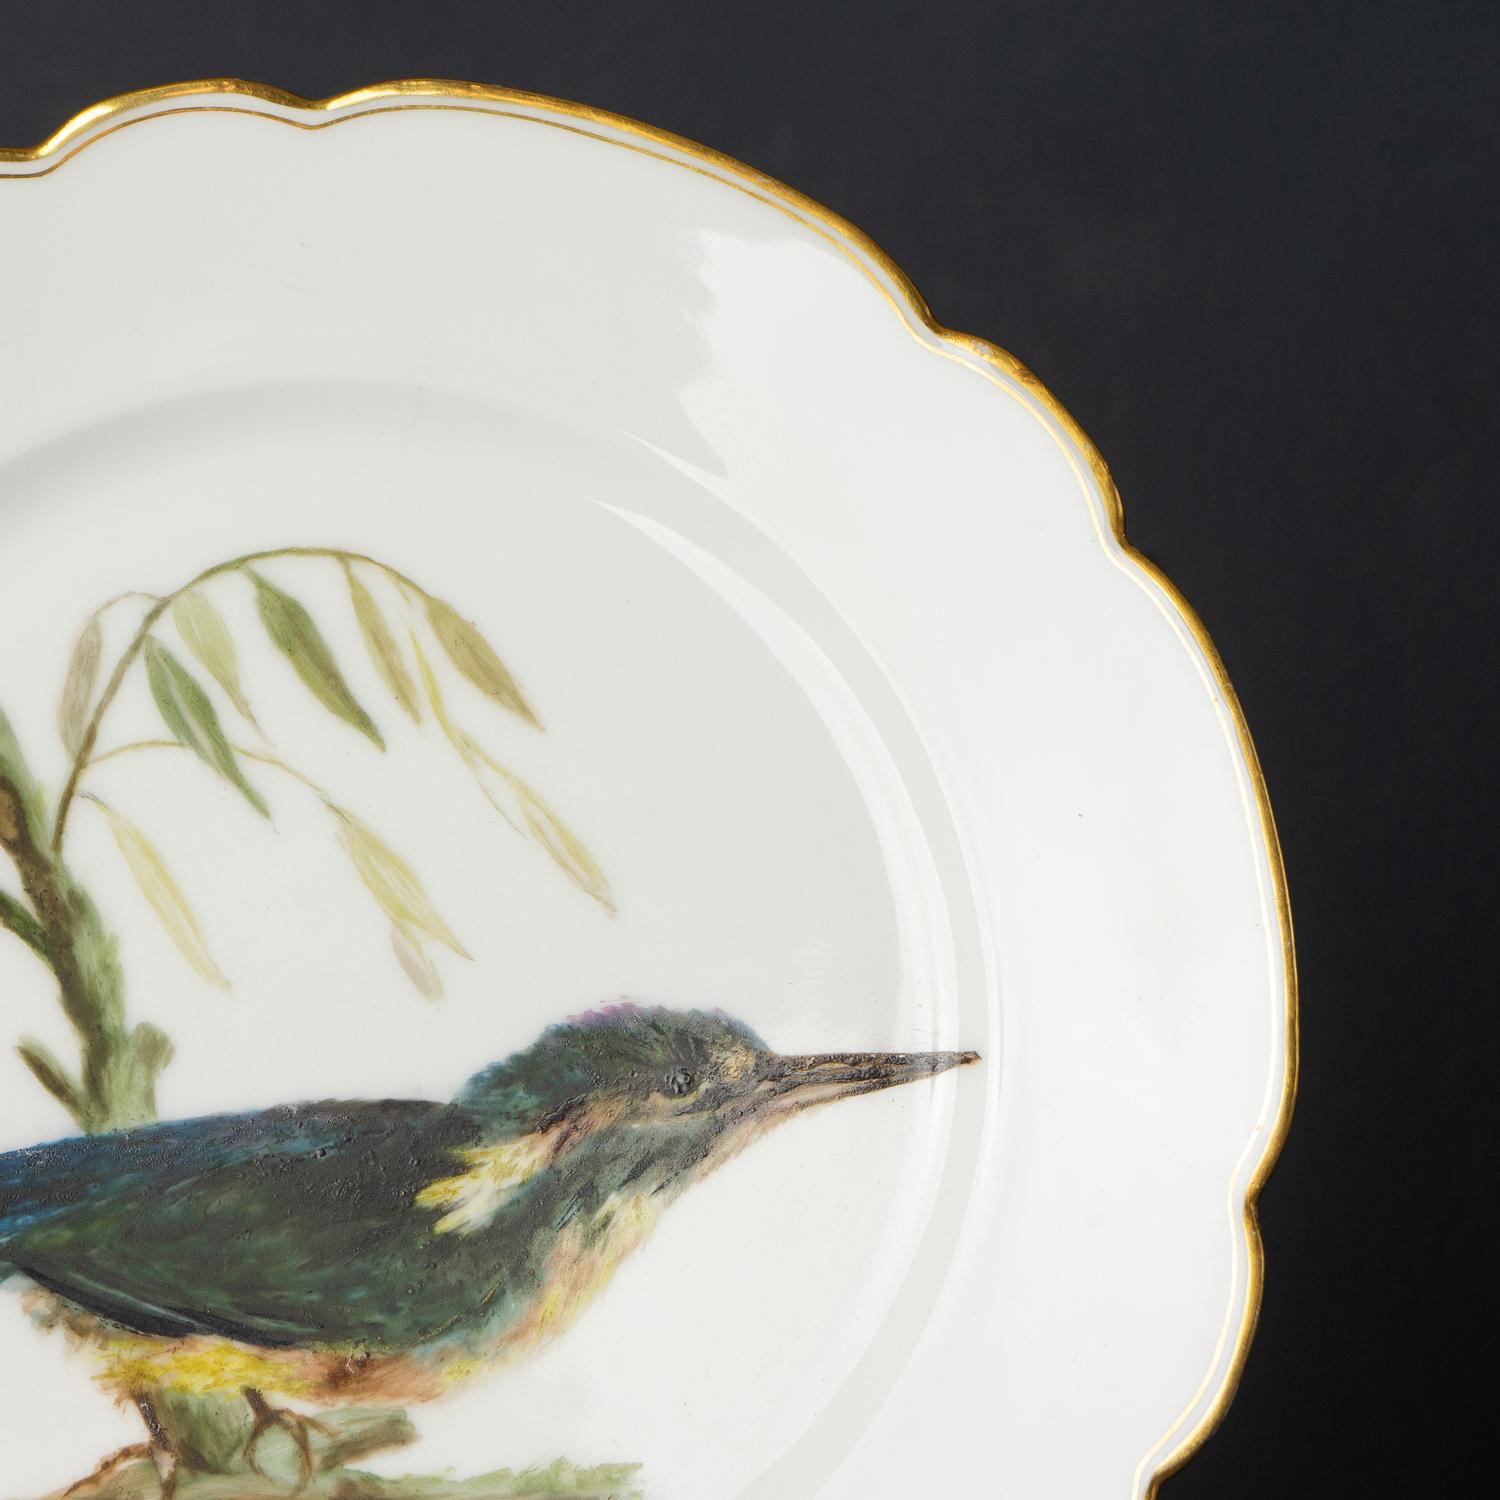 Antique French Hand-Painted Kingfisher Porcelain Plate, 19th Century For Sale 1